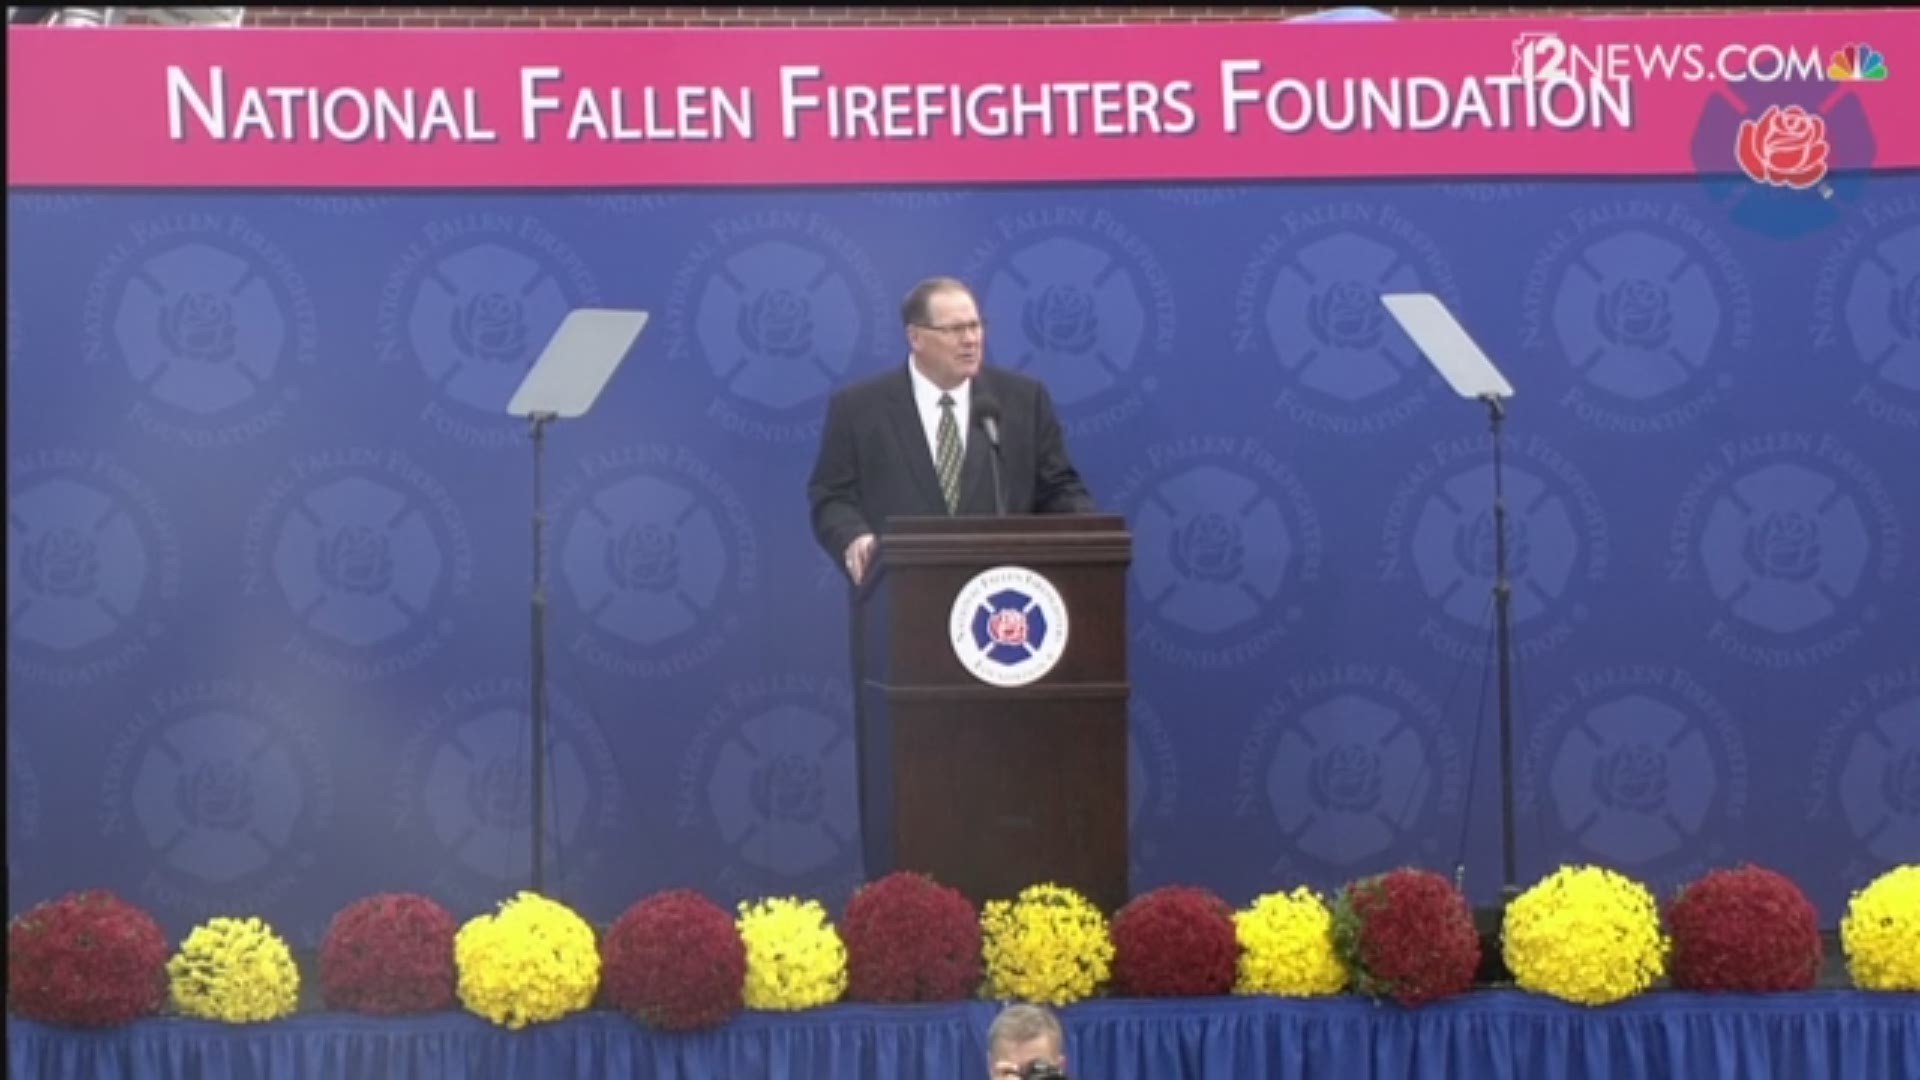 Firefighter Joshua Eugin was honored during the 38th National Fallen Firefighters Memorial Service on Sunday.